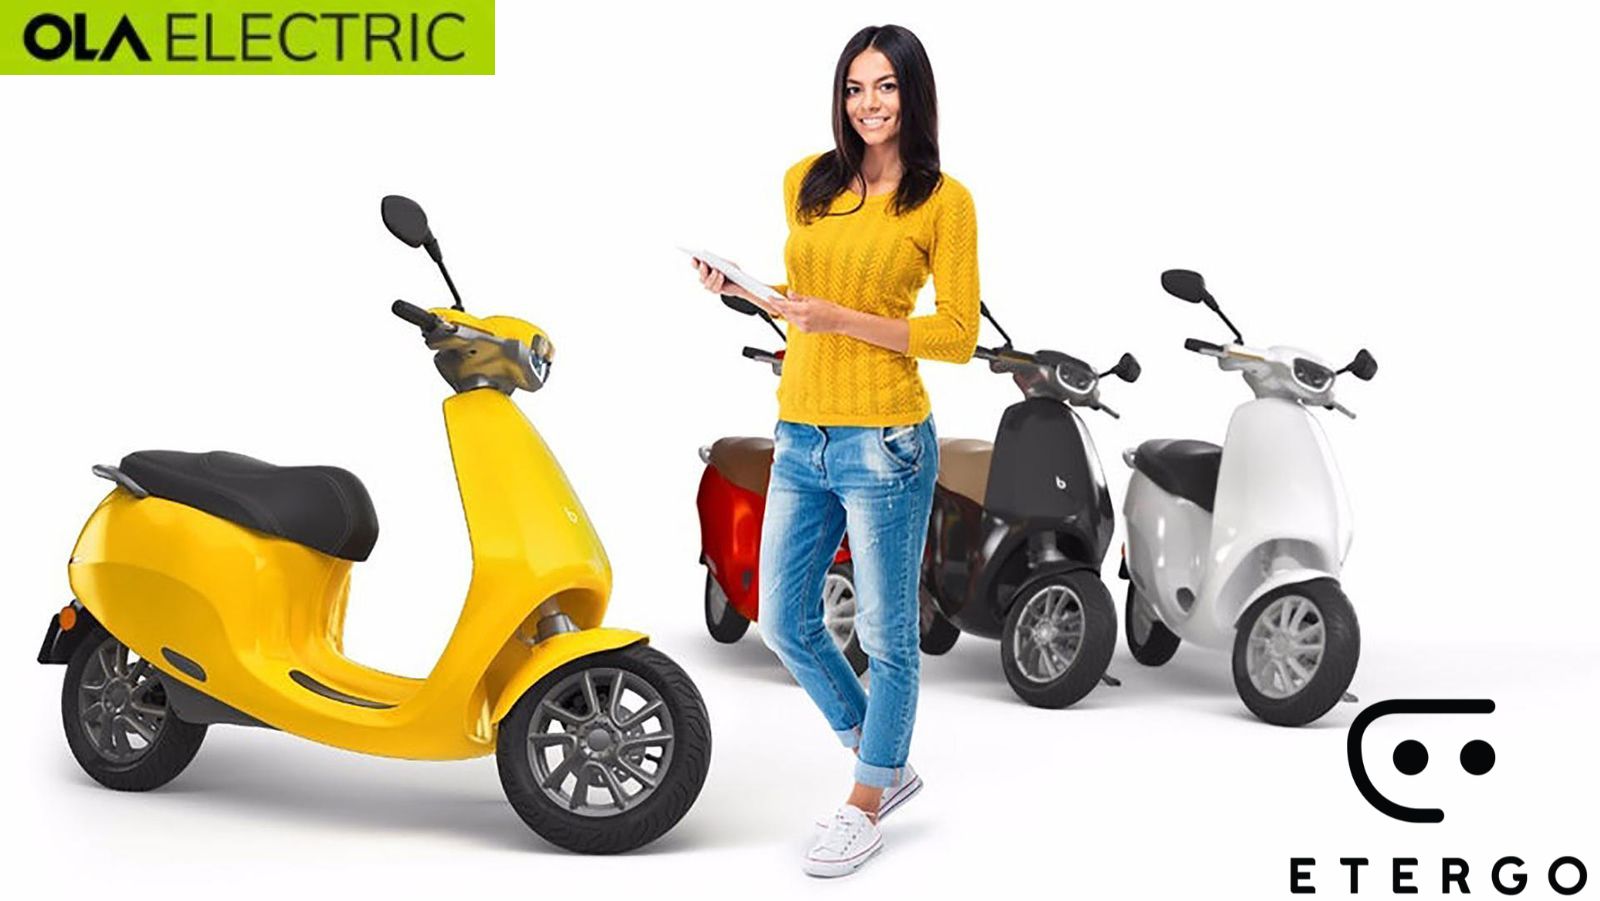 Indian Startup, Ola Electric, Mobility, Amsterdam, Dutch Firm, Electric Scooter, Etergo, Electric Vehicles, Electric Scooter, Indian Firm, Ola Cabs, Ride Hailing Services, Soft Bank, Bart Jacobsz Rosier, Bhavish Aggarwal, OEM